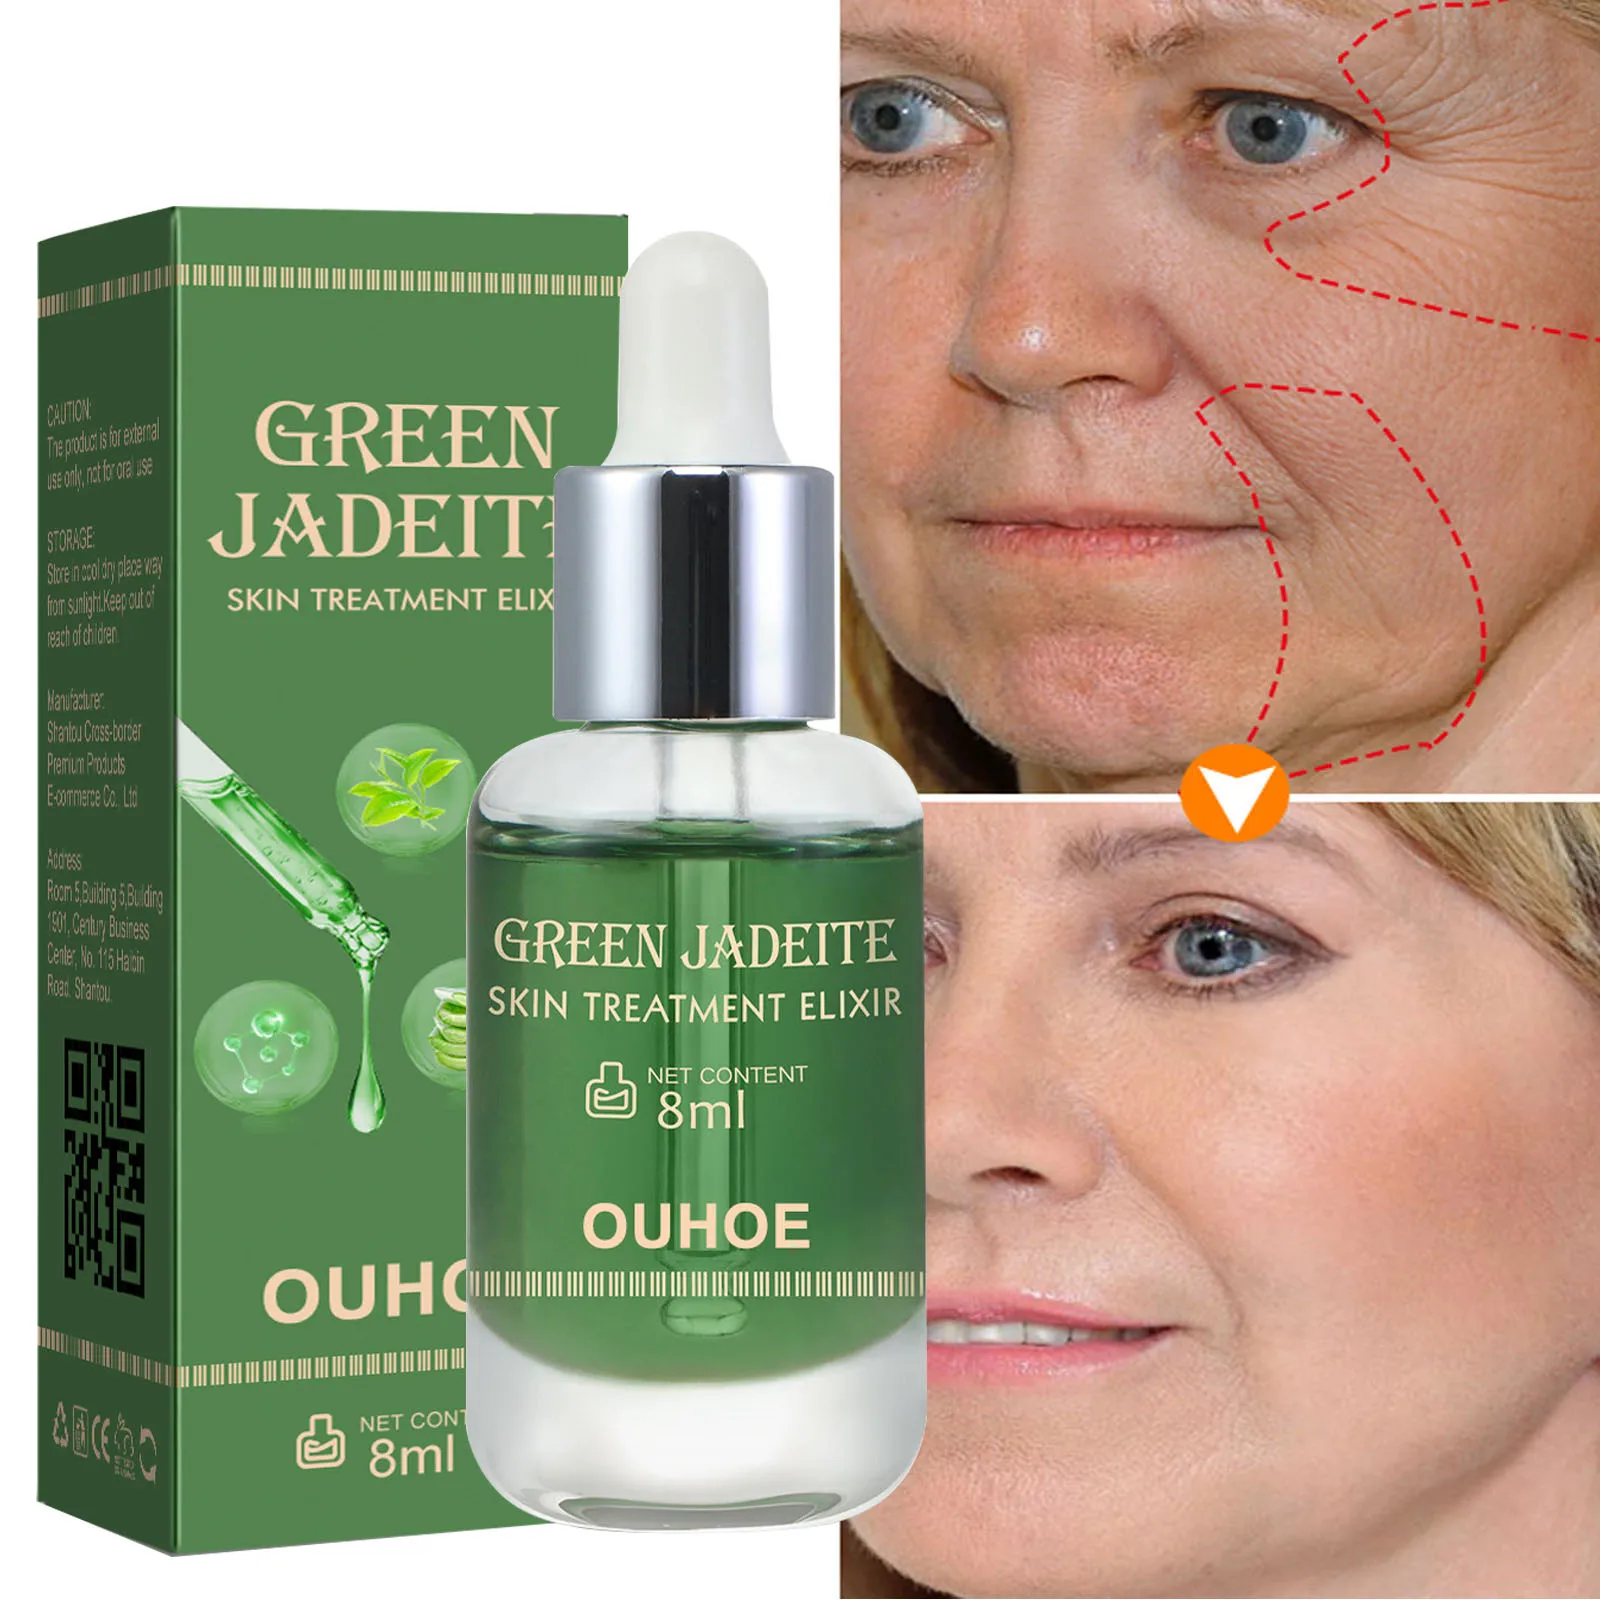 Effective Remove Wrinkle Face Serum Lifting Firming Anti-aging Fade Freckles Dark Spots Essence Whitening Moisturizing Skin Care